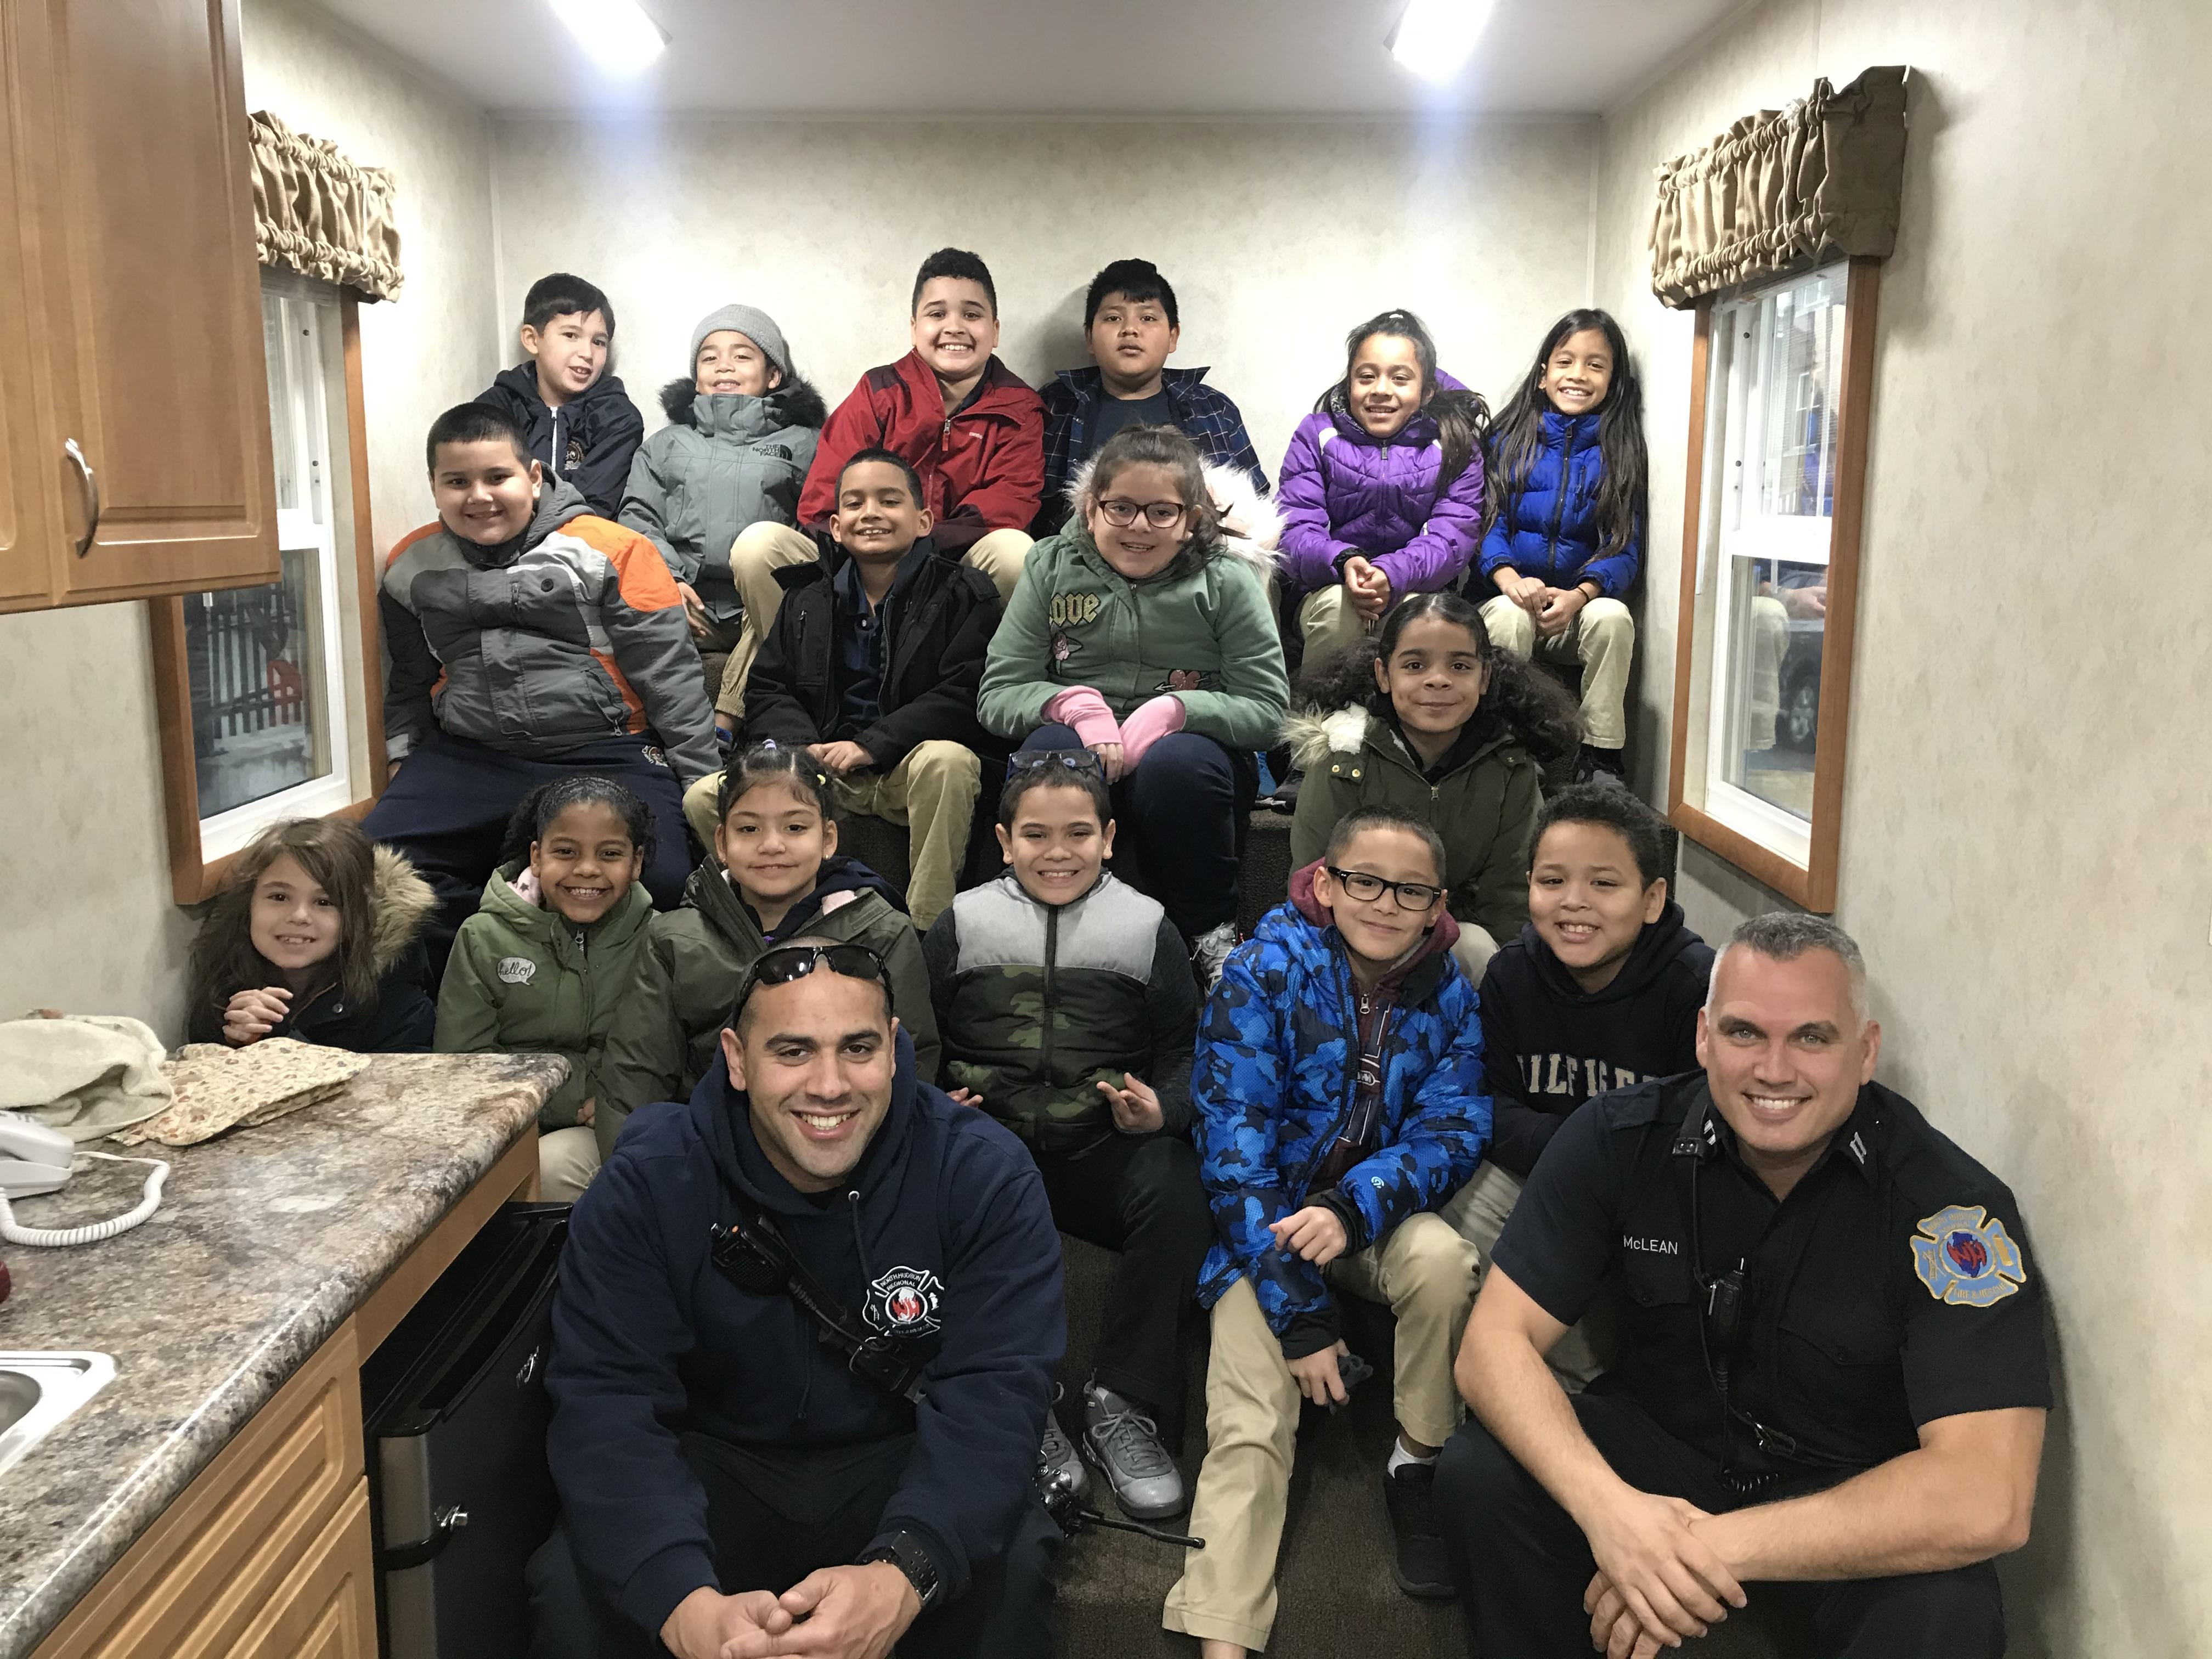 class poses with the two firefighters inside the fire safety house